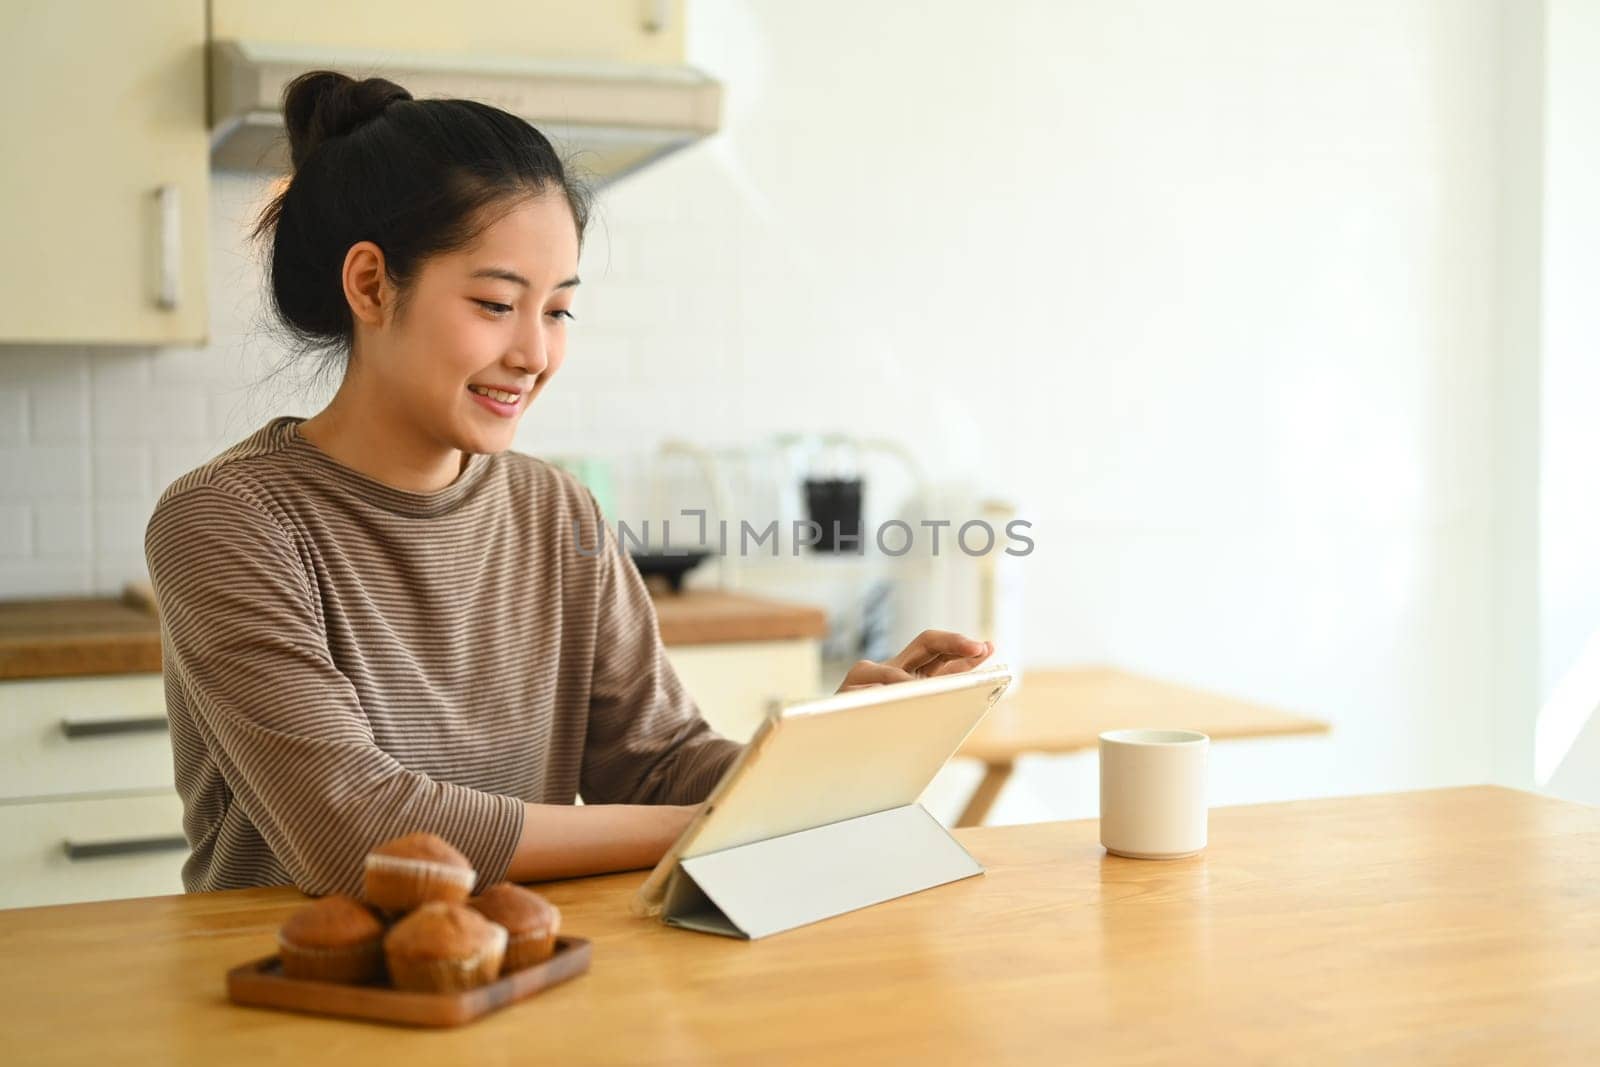 Young Asian woman sitting at kitchen table reading news or checking email on digital tablet.